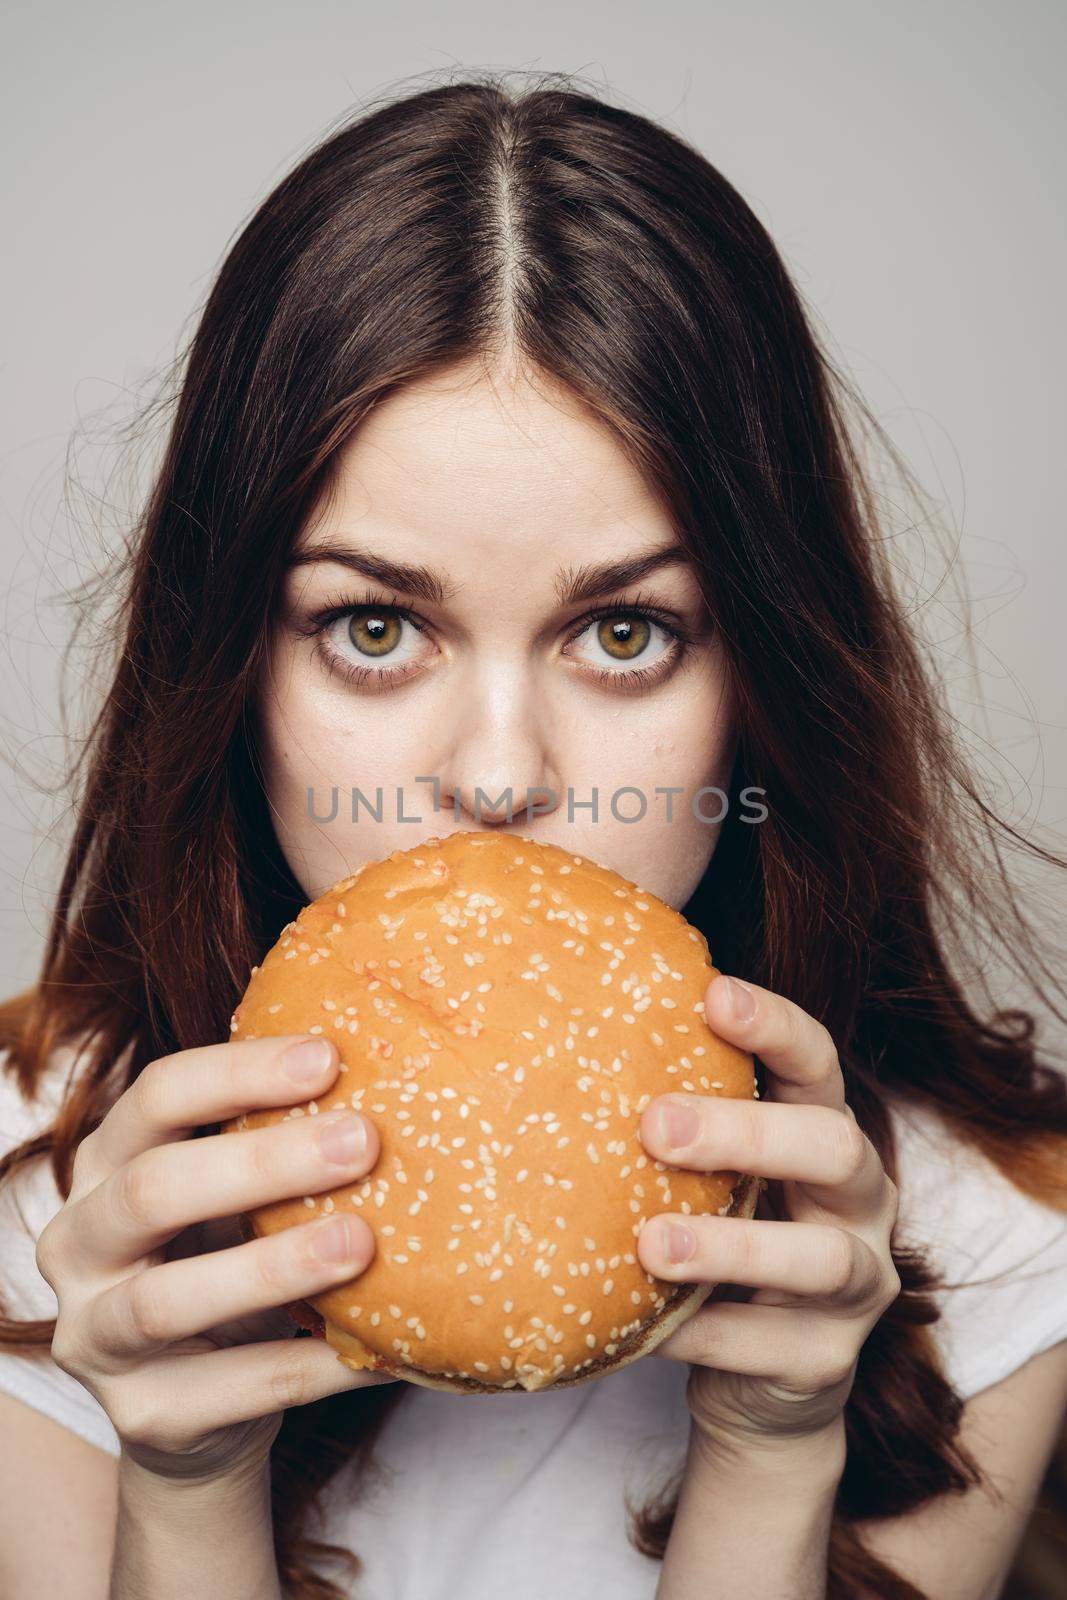 woman with a hamburger in her hands a snack fast food close-up. High quality photo